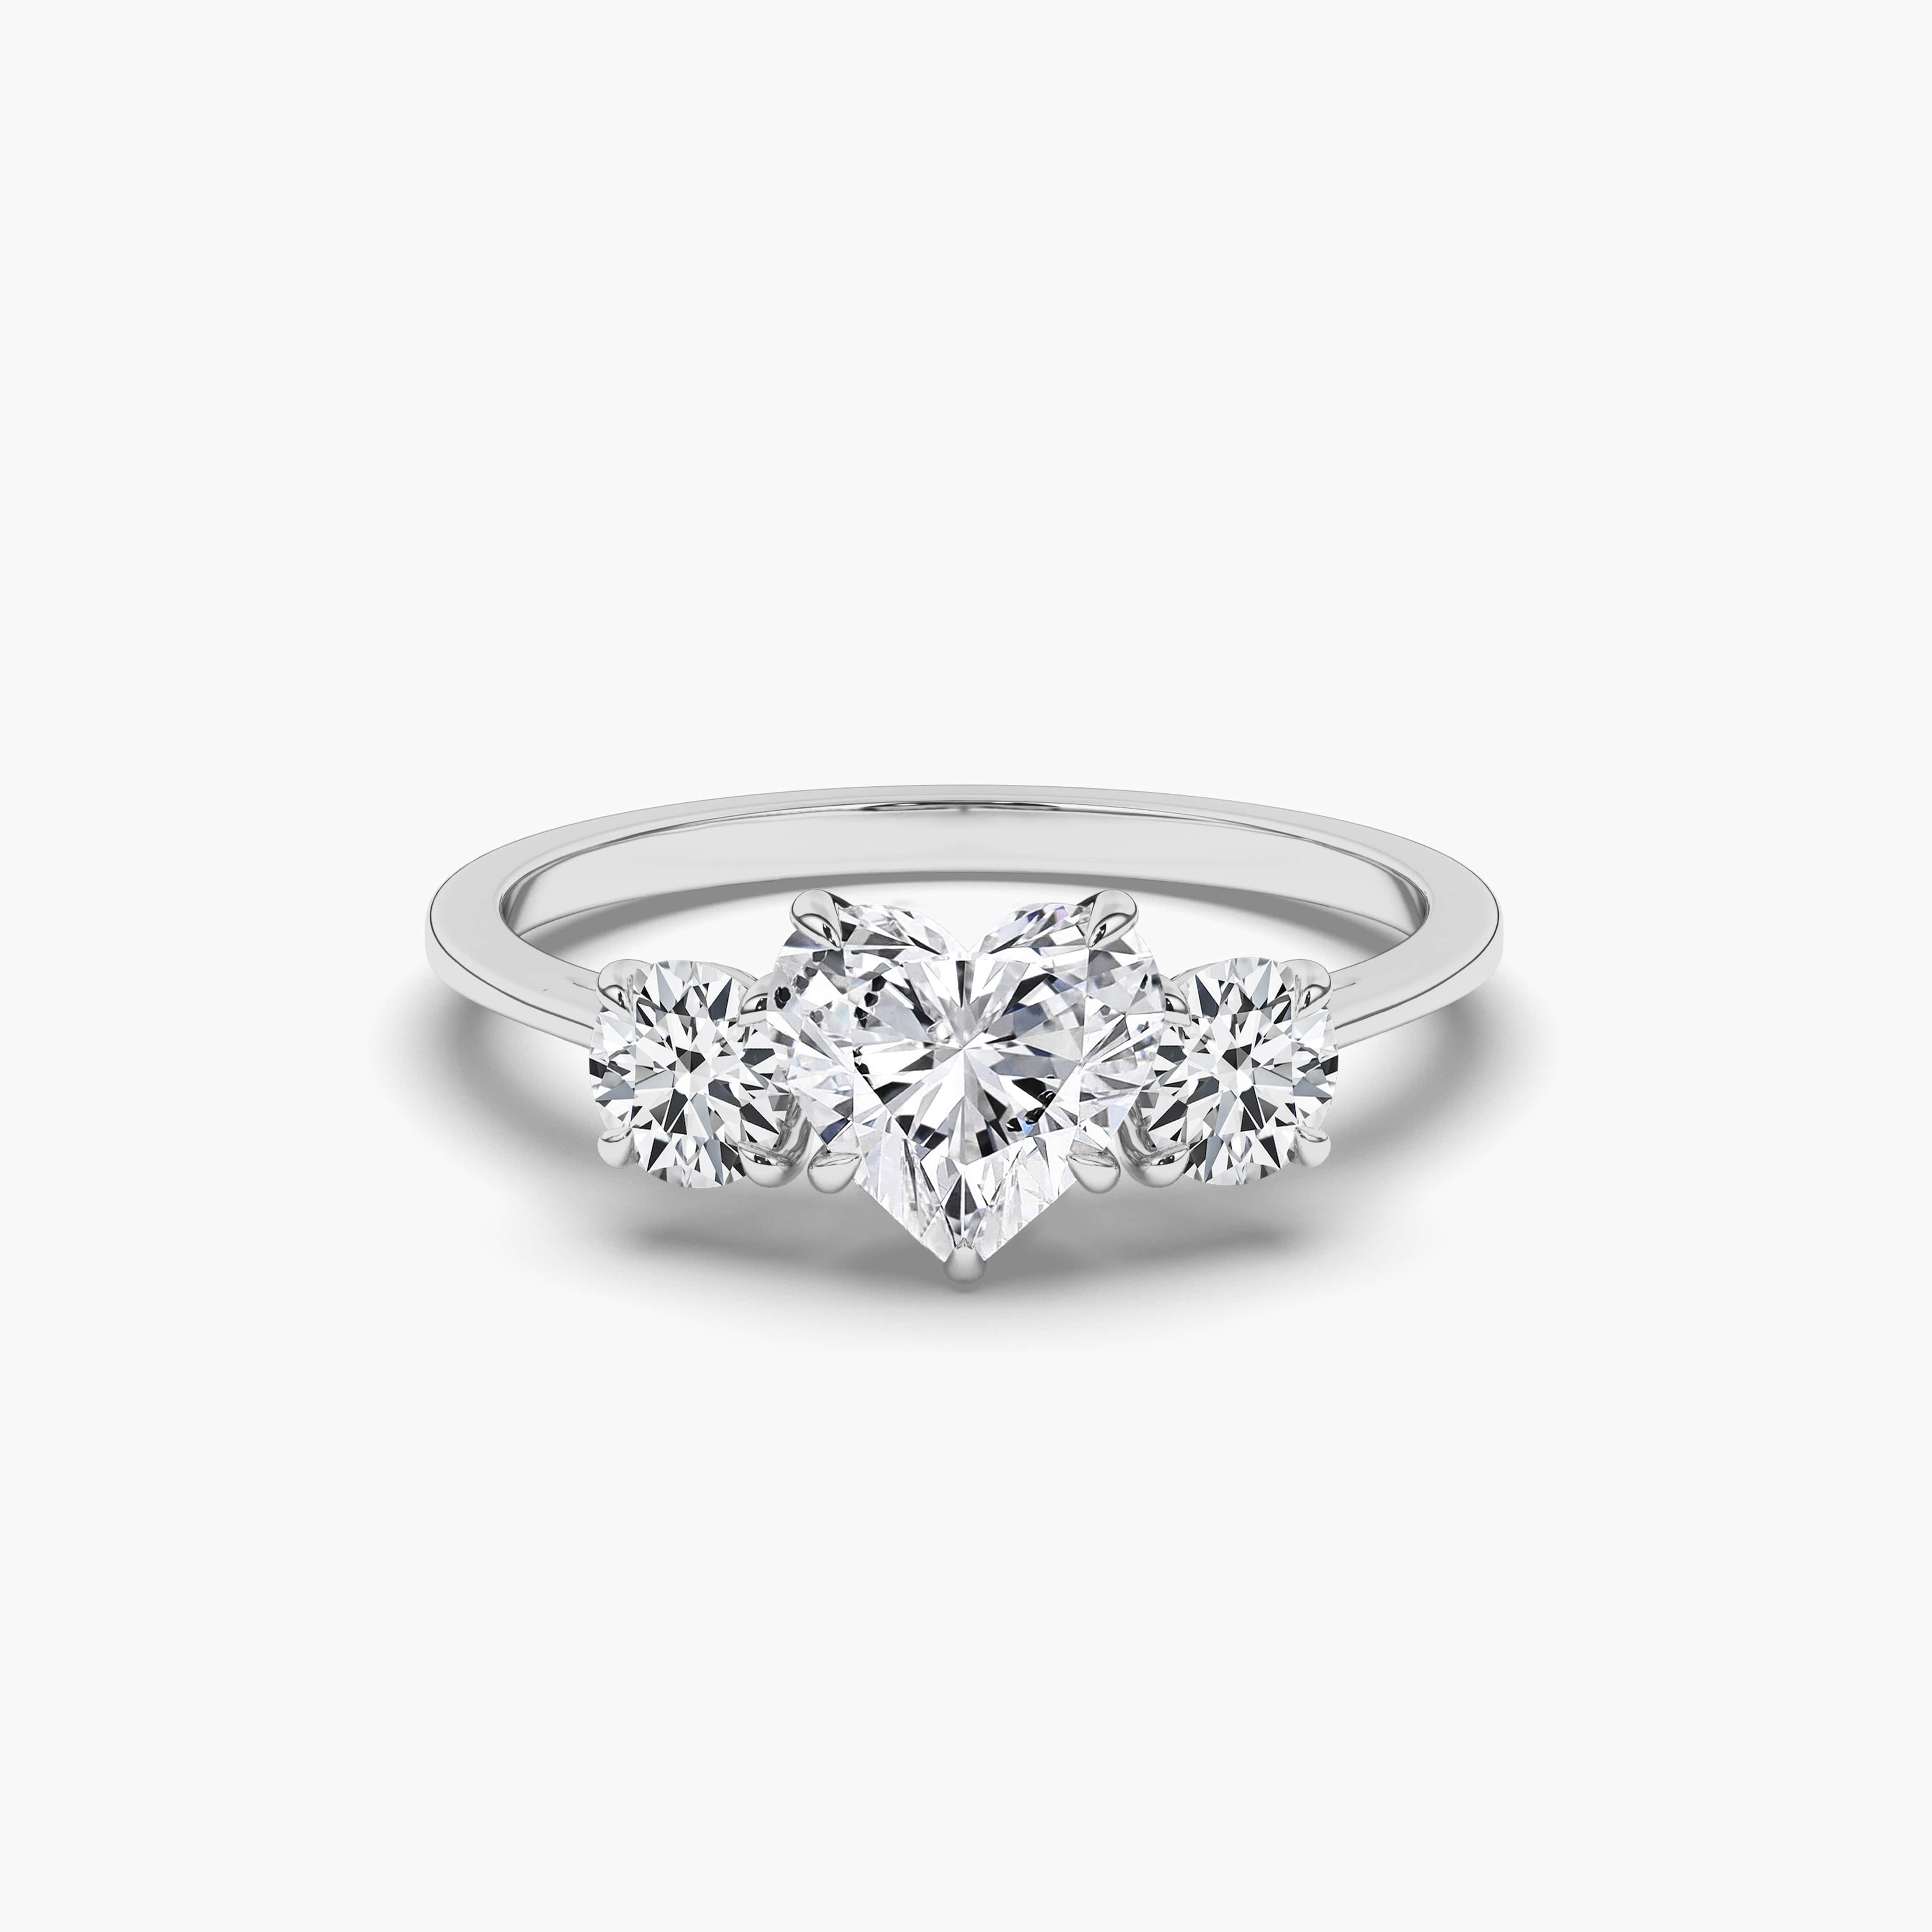 WHITE GOLD RIVER DELICATE HEART SHAPED DIAMOND SHARED RING